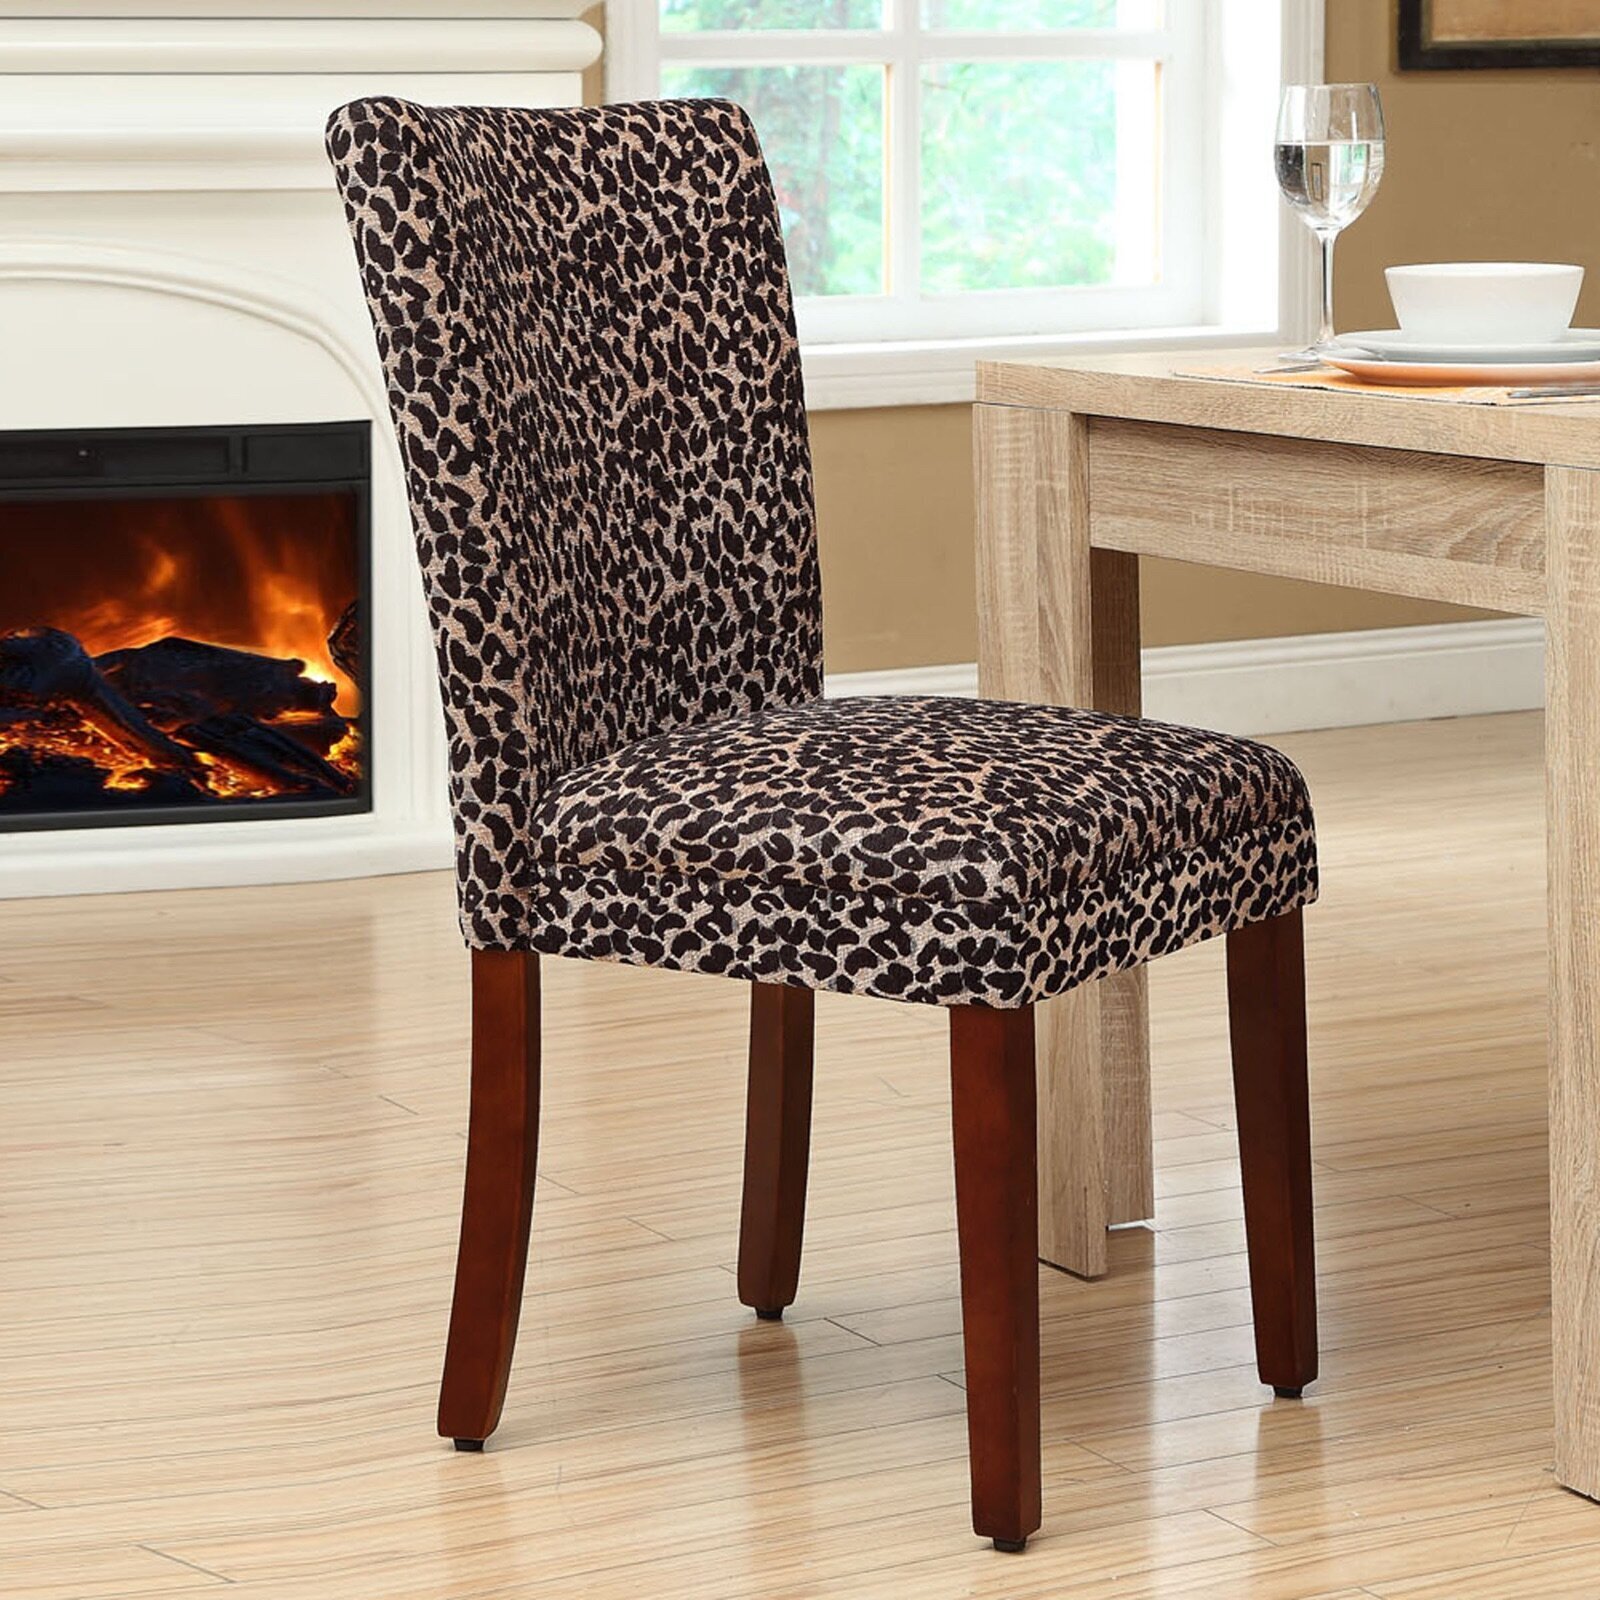 Set of Two Leopard Print Dining Chairs